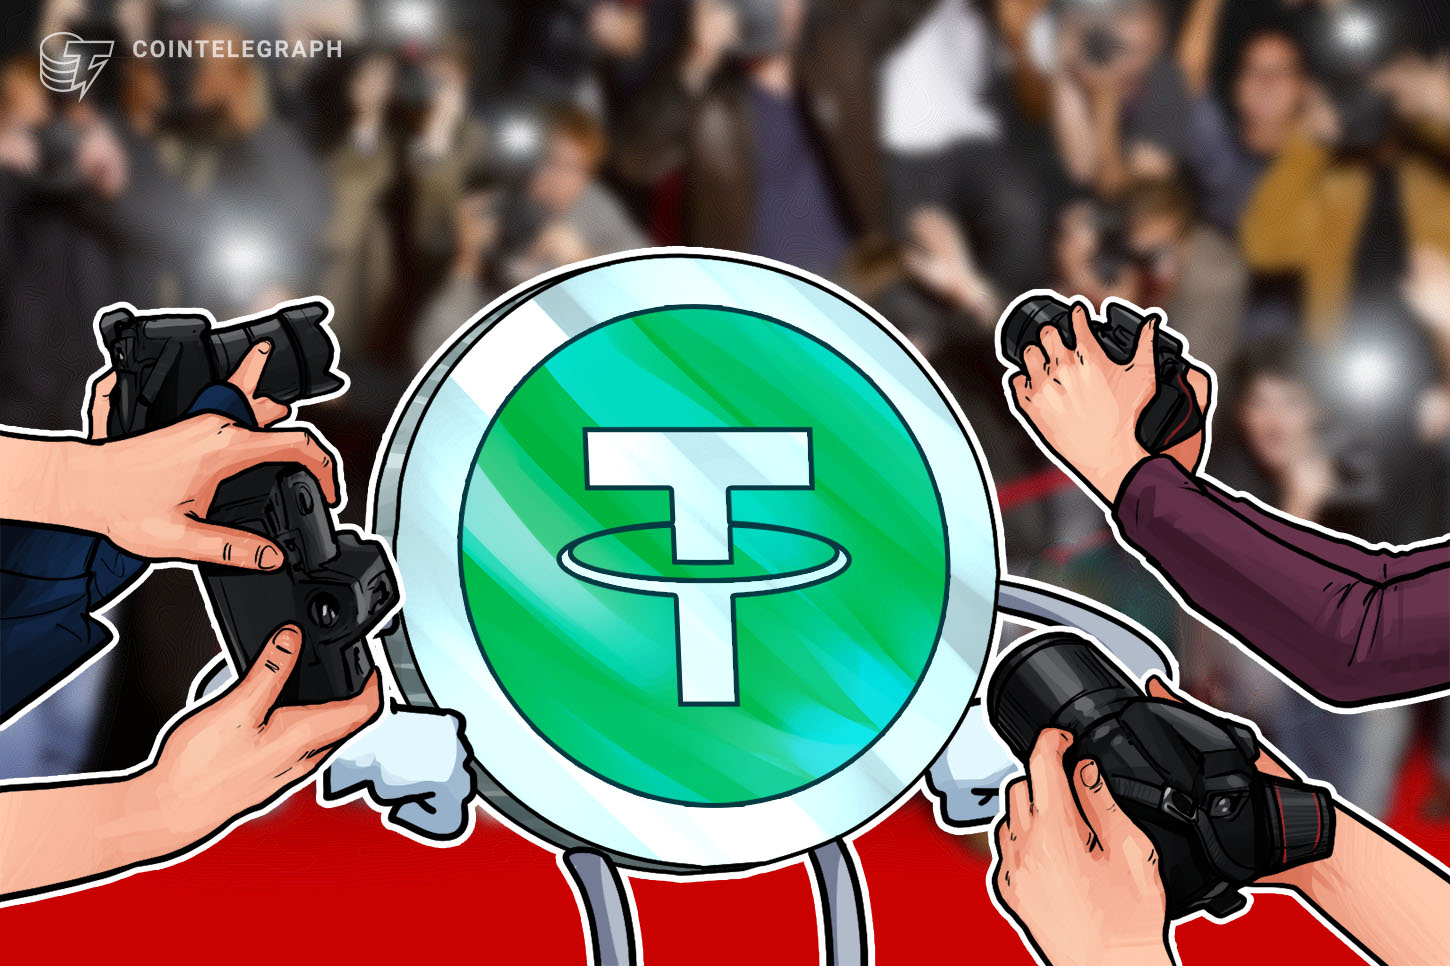 A by-the-minute take a look at Tether’s $1 billion swap from Bitfinex to Binance